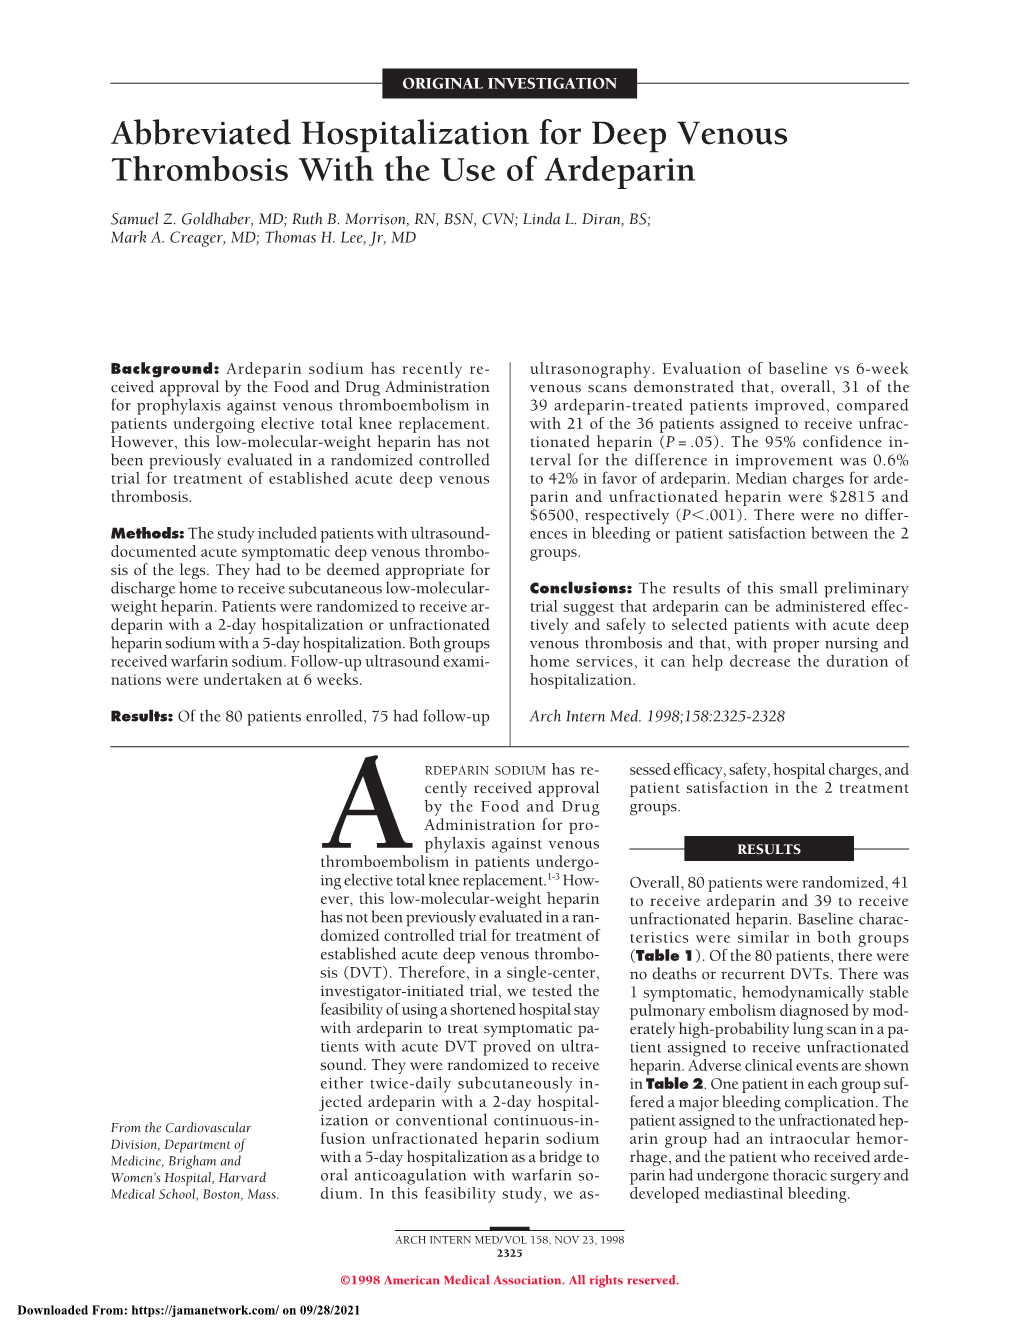 Abbreviated Hospitalization for Deep Venous Thrombosis with the Use of Ardeparin